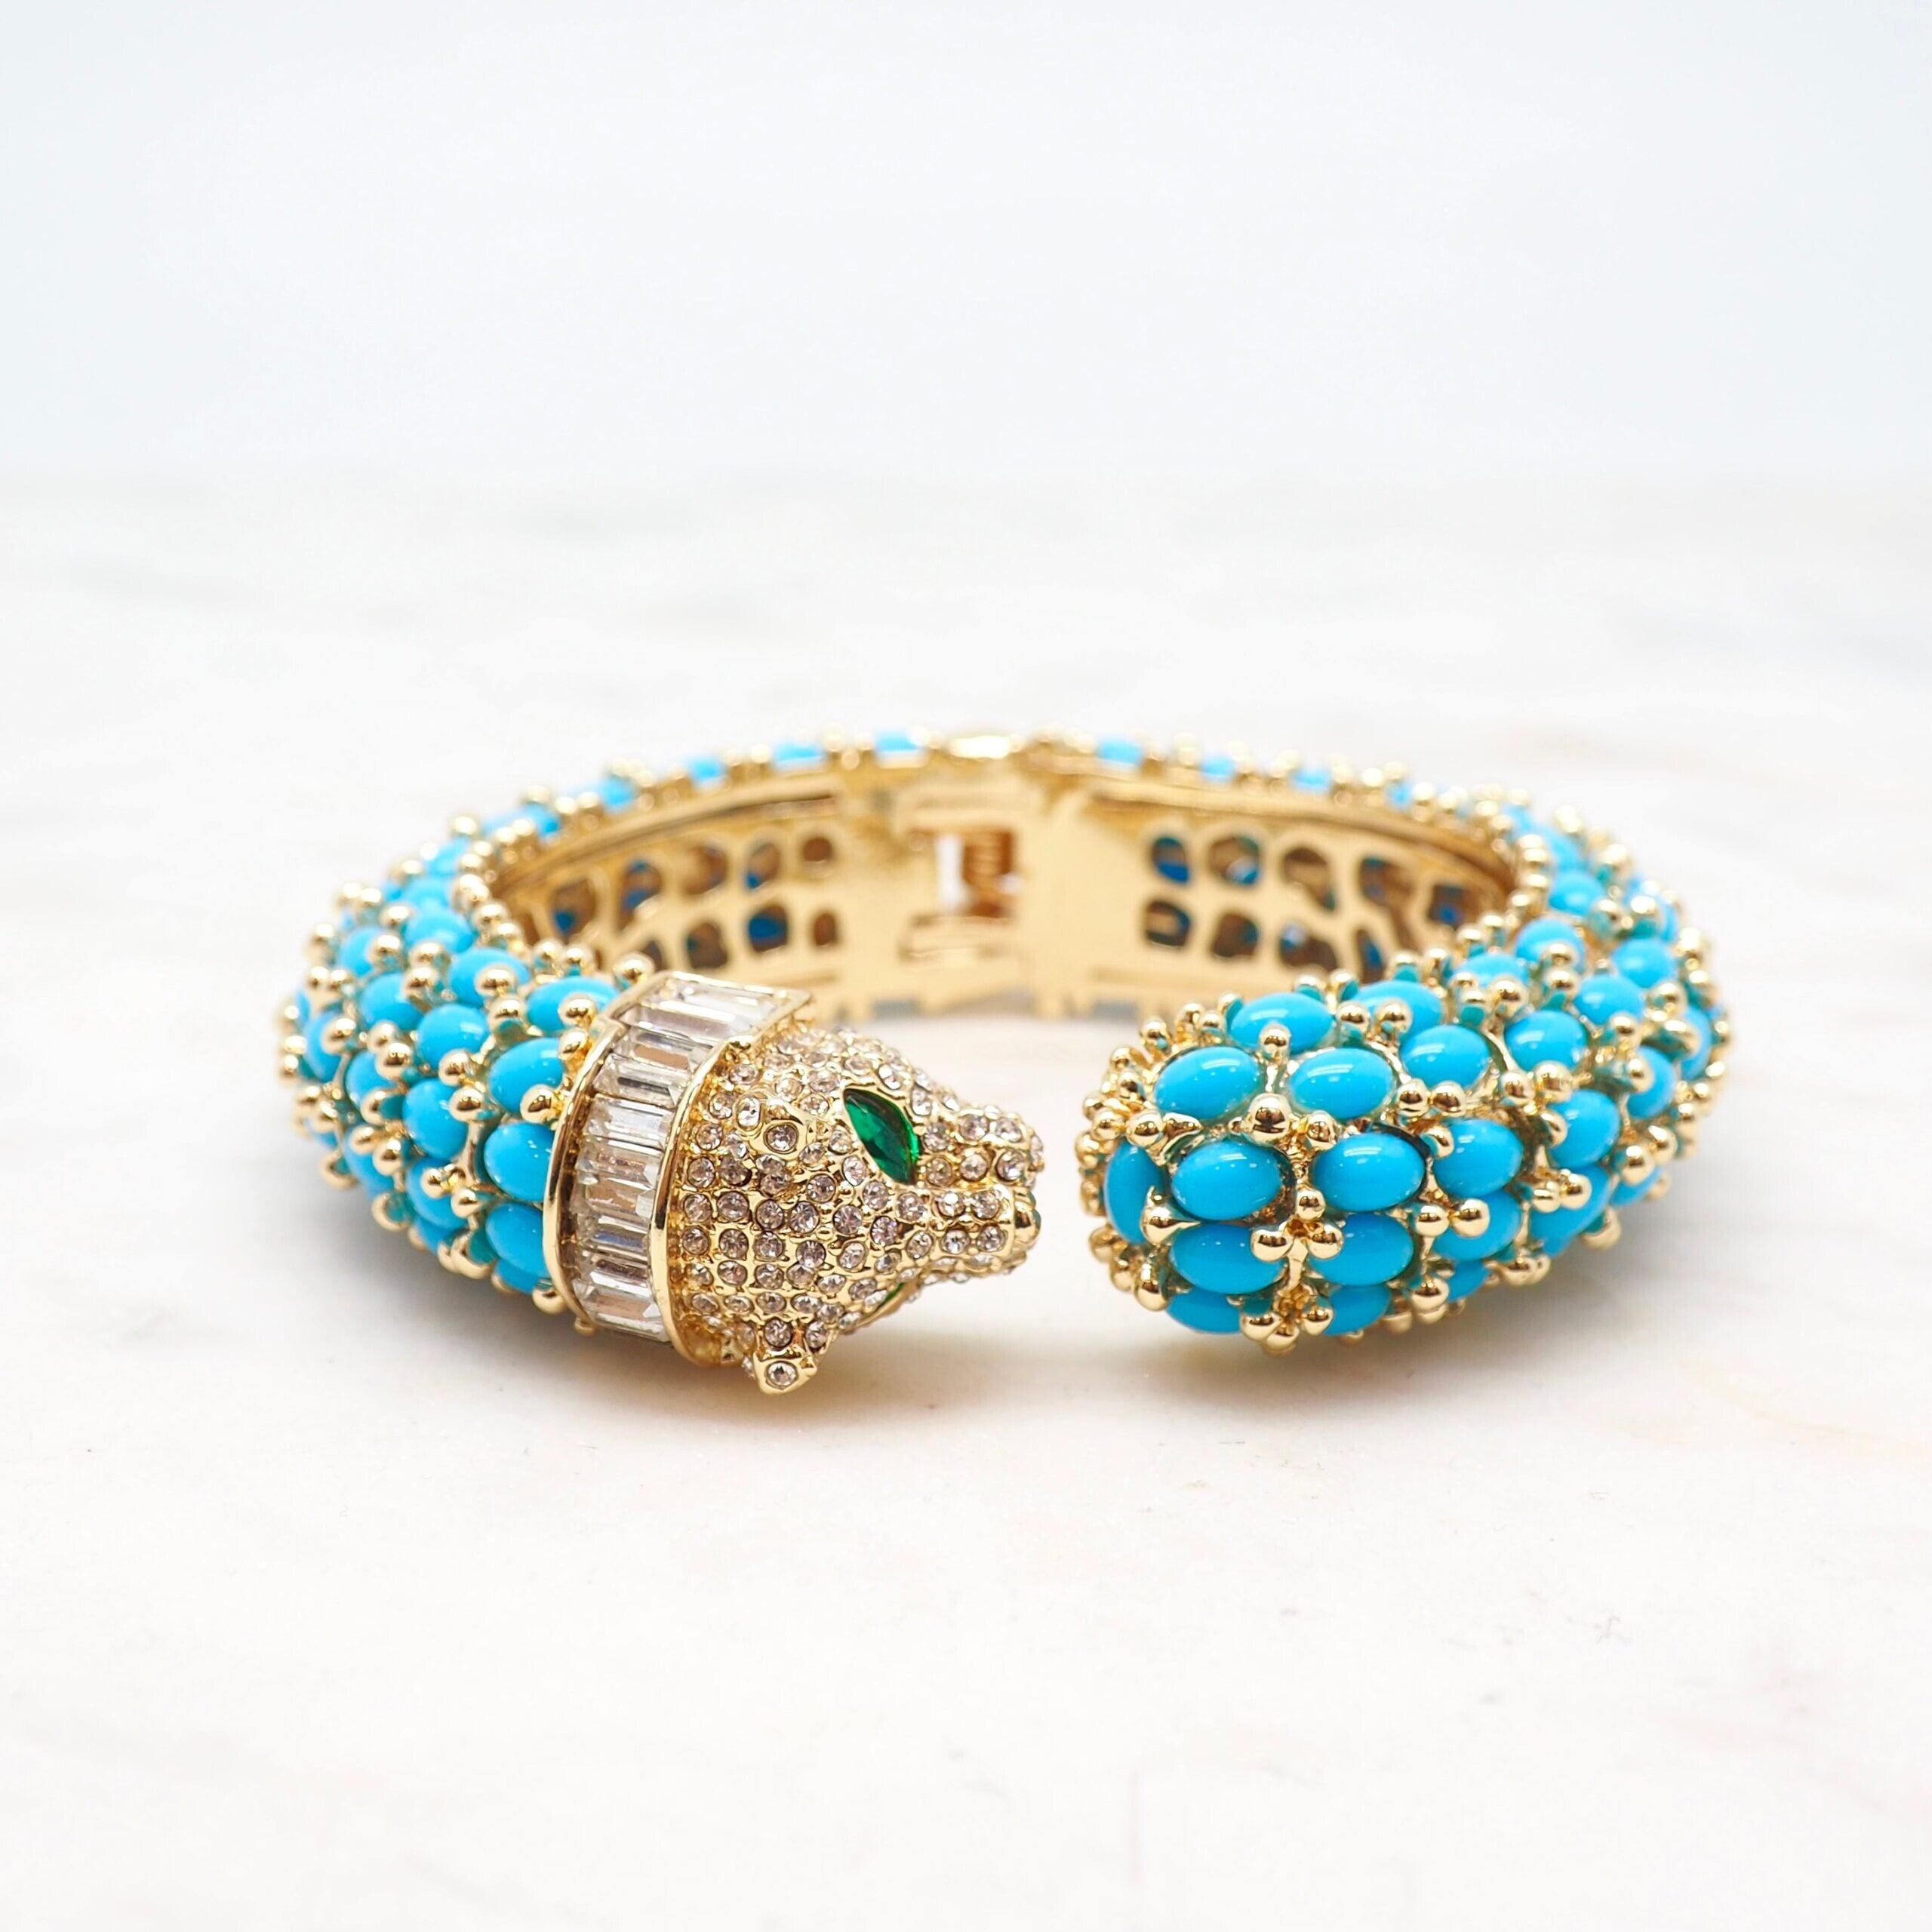 The Tiger Bangle - Turquoise